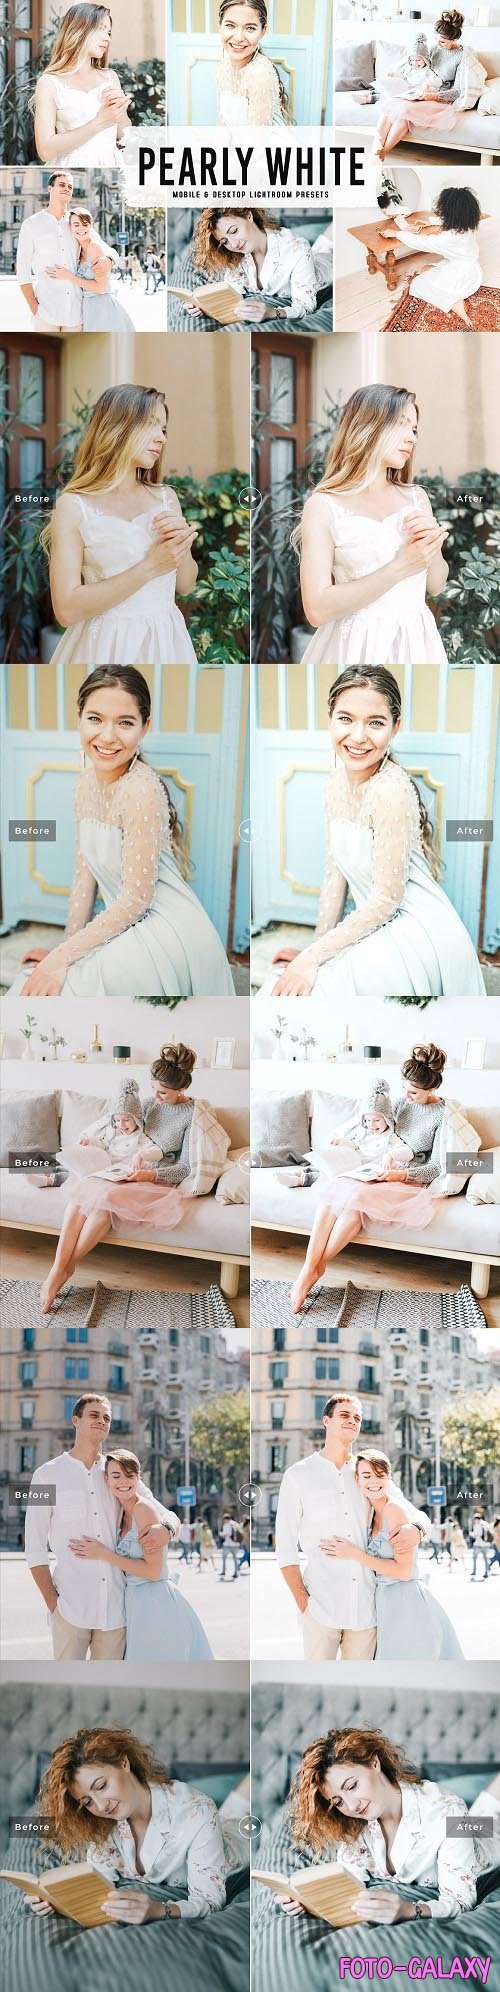 Pearly White Pro Lightroom Presets - 6346201